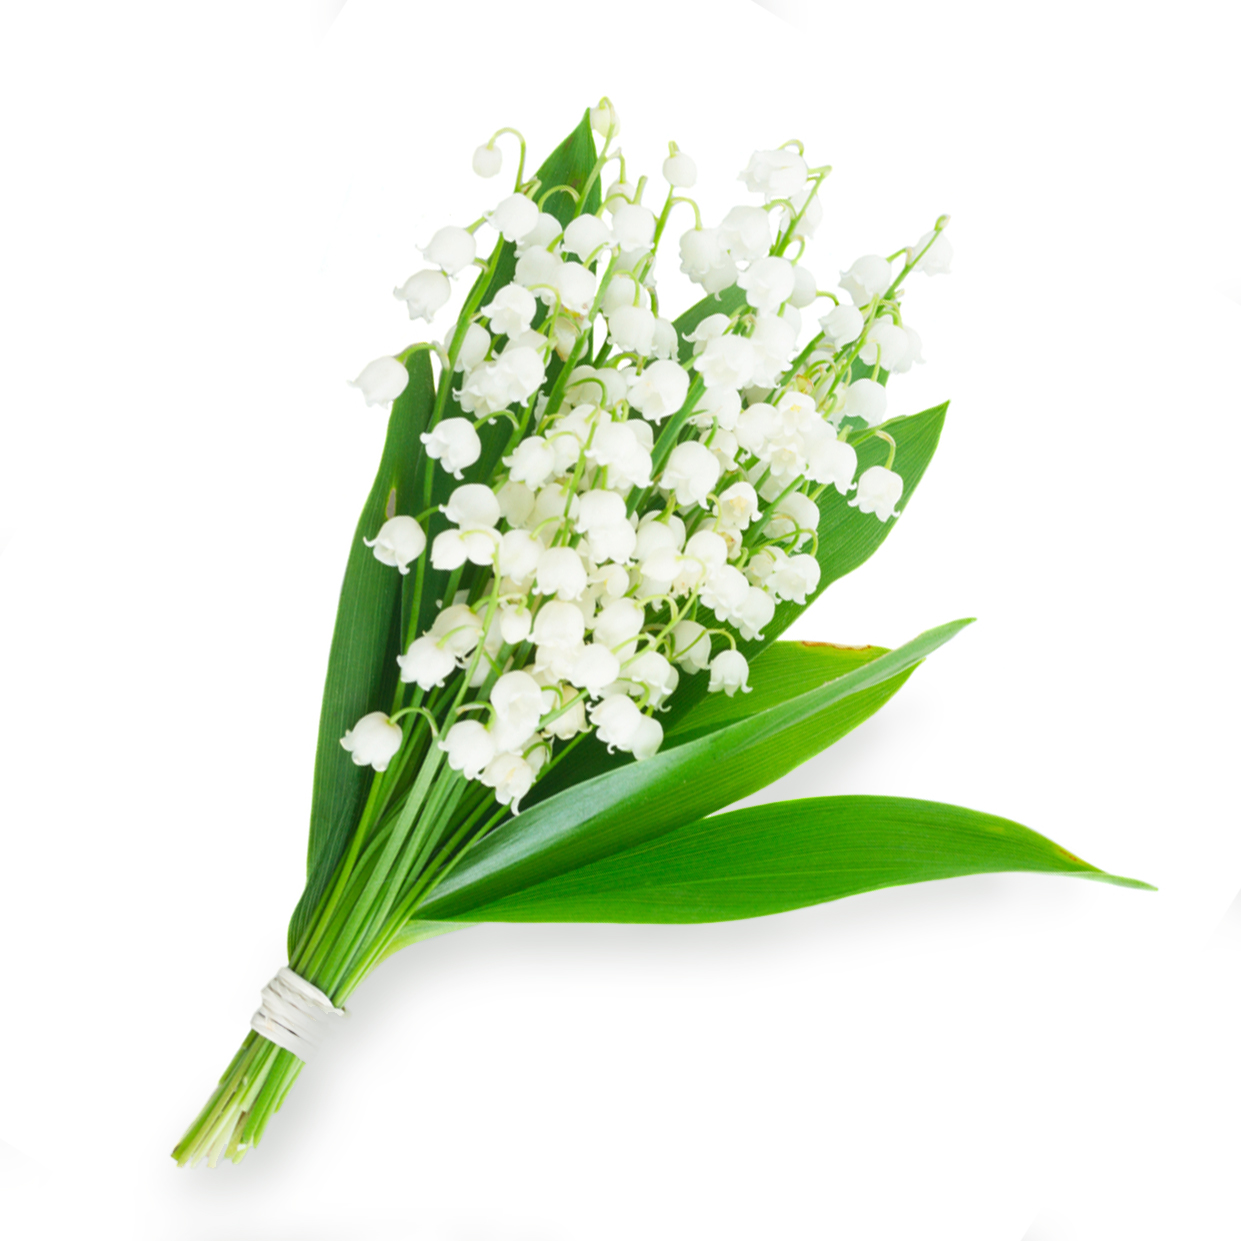 LILY OF THE VALLEY - sent on October 11th, 2020